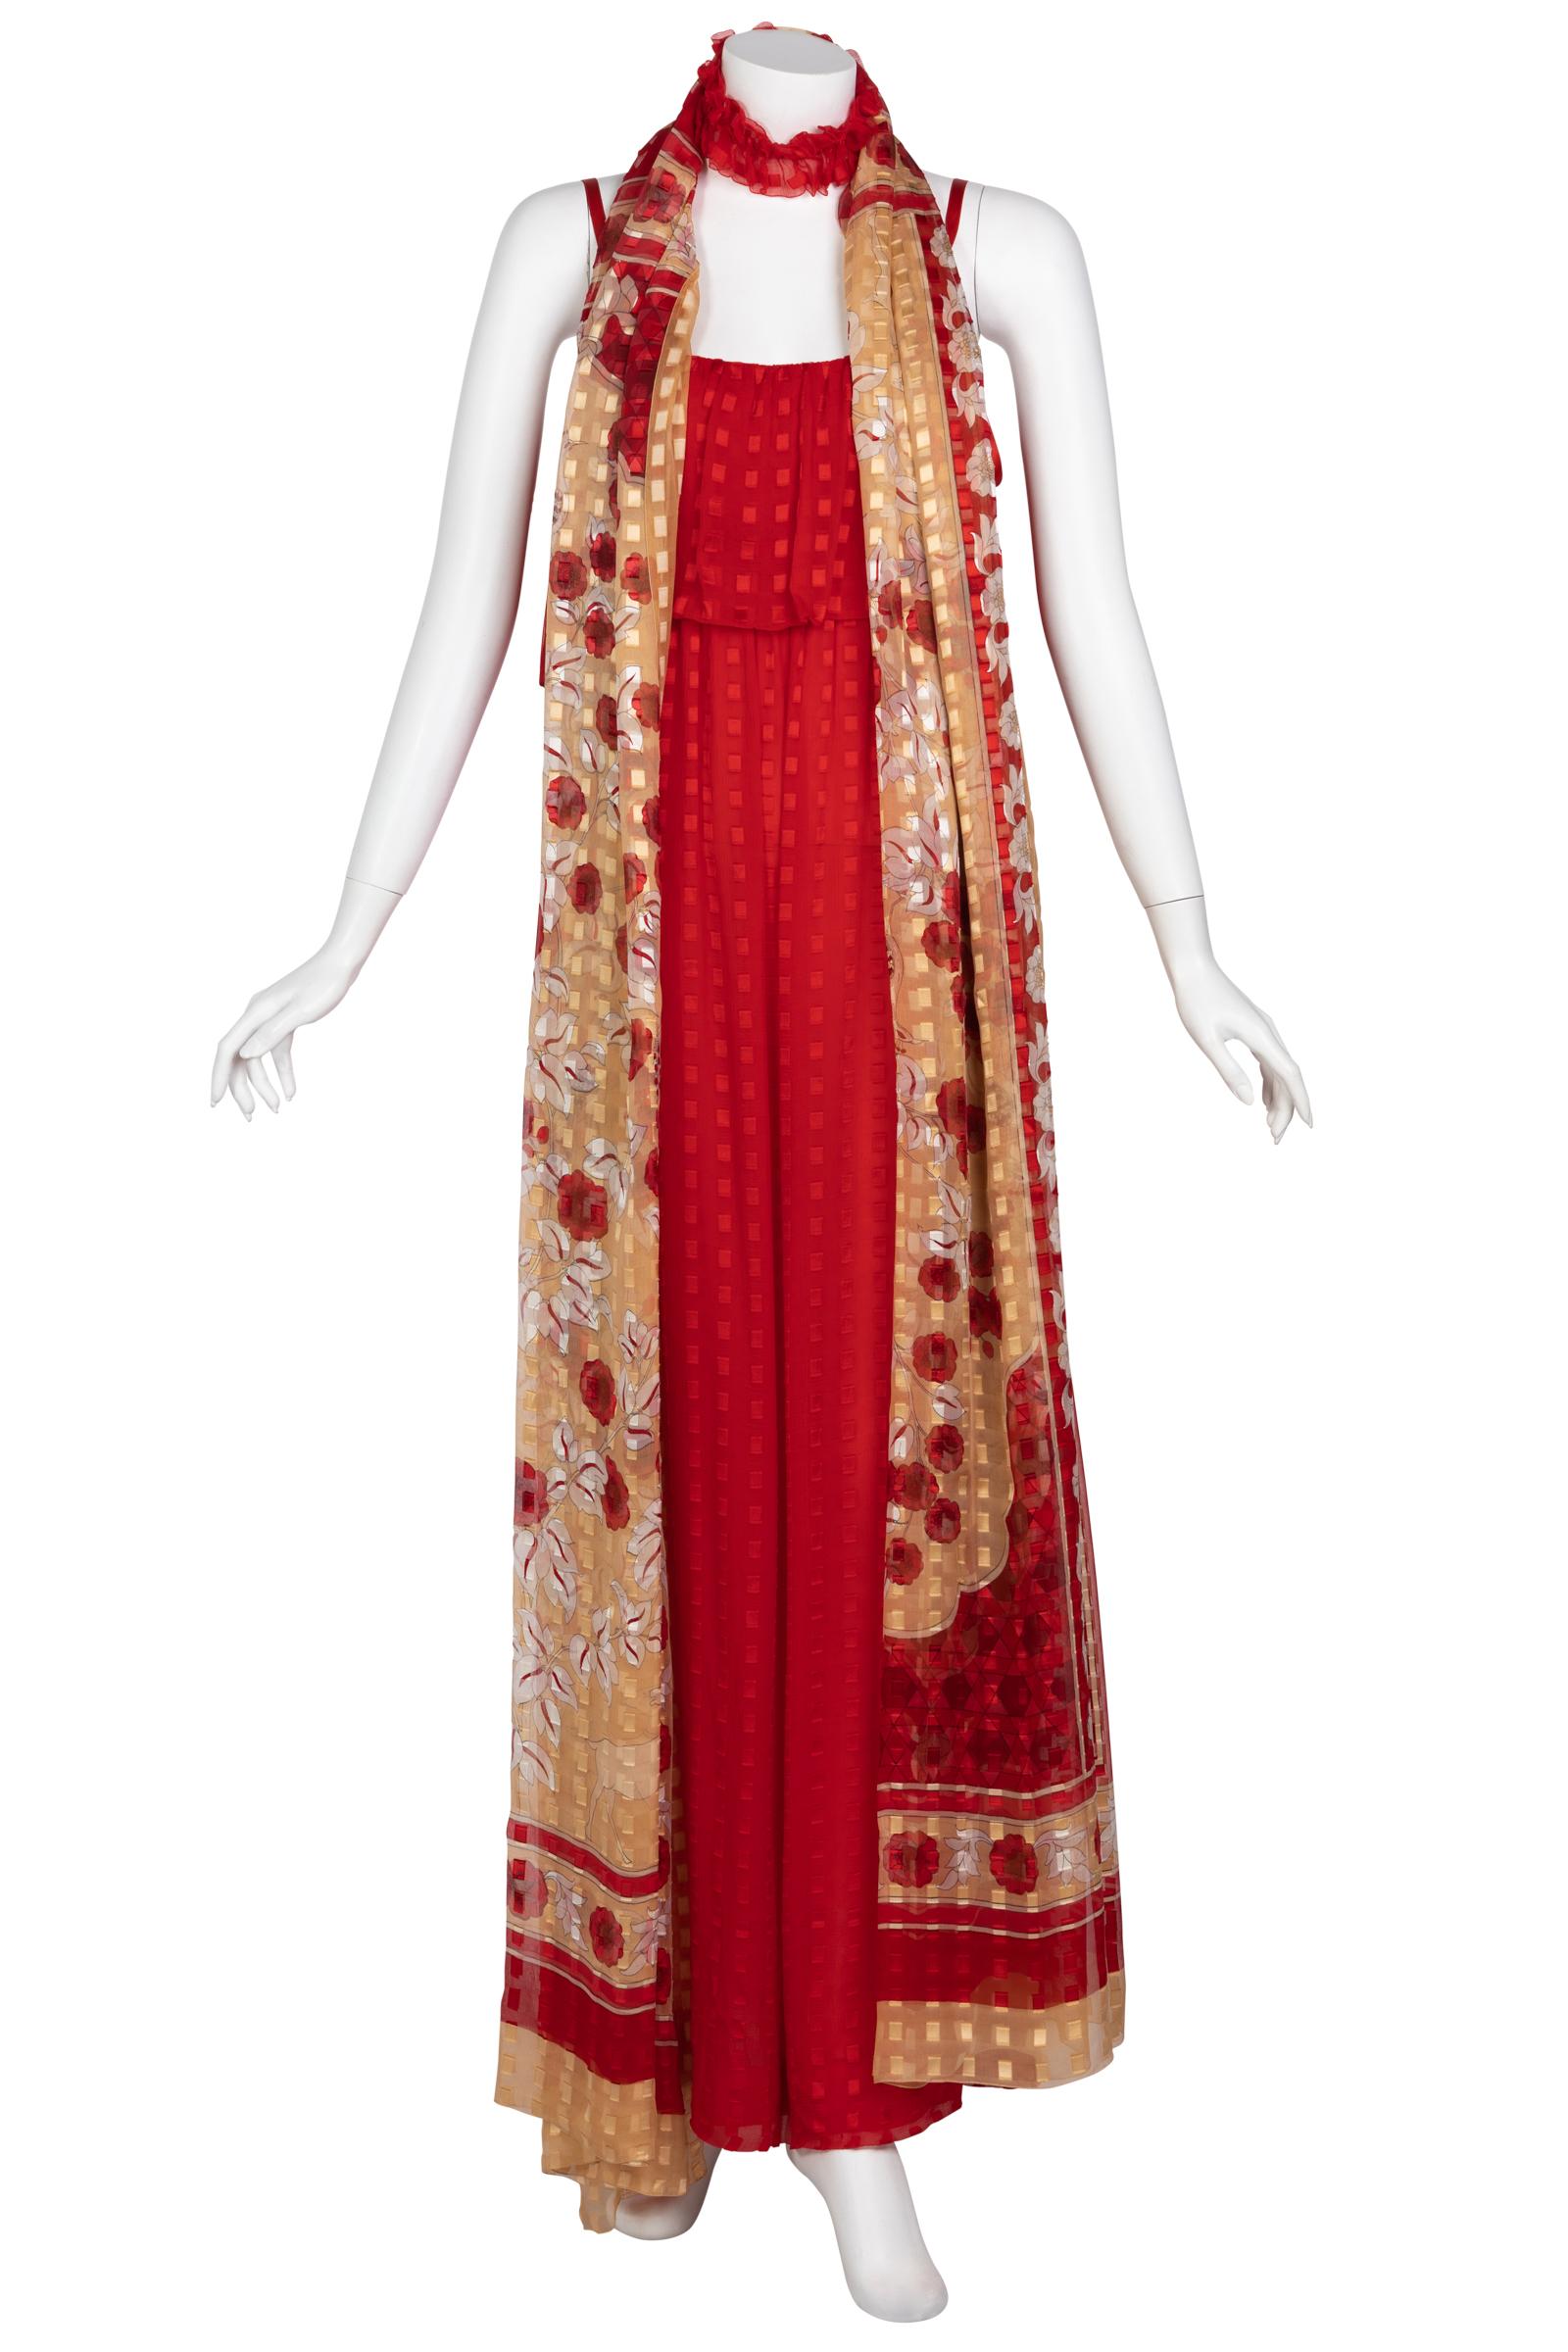 Christian Dior Red Maxi Dress & Shawl Documented 1970s 4